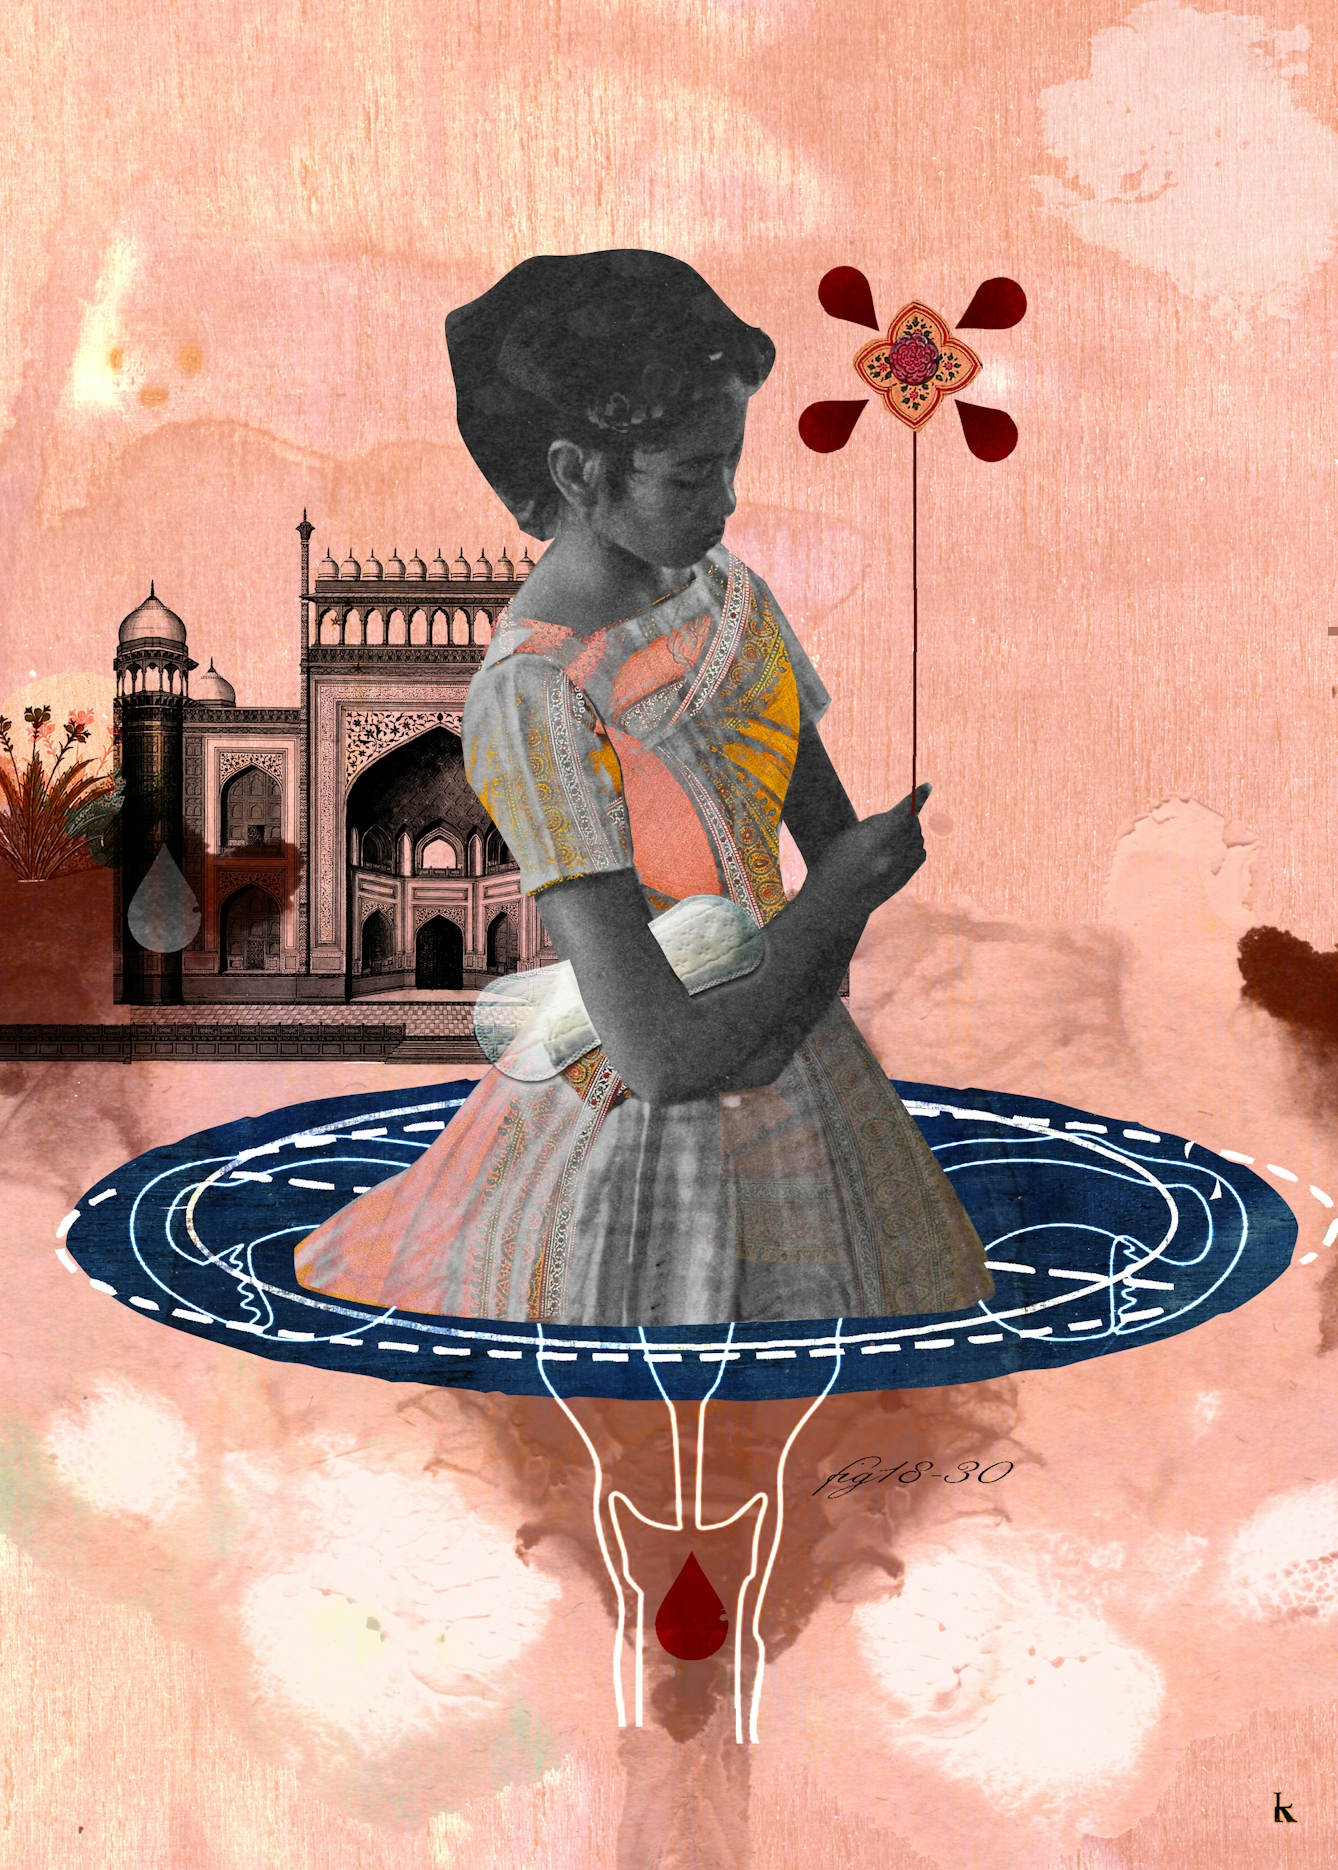 Mixed media digital collage on a pink textured fabric and watercolour background.  The black and white figure of a woman has a sanitary towel in hand is holding a flower shaped ballon.  The woman is placed in a puddle-like female reproductive system that has been spliced with a diagram of the moon,  An etching of a South Asian building is depicted in the background.